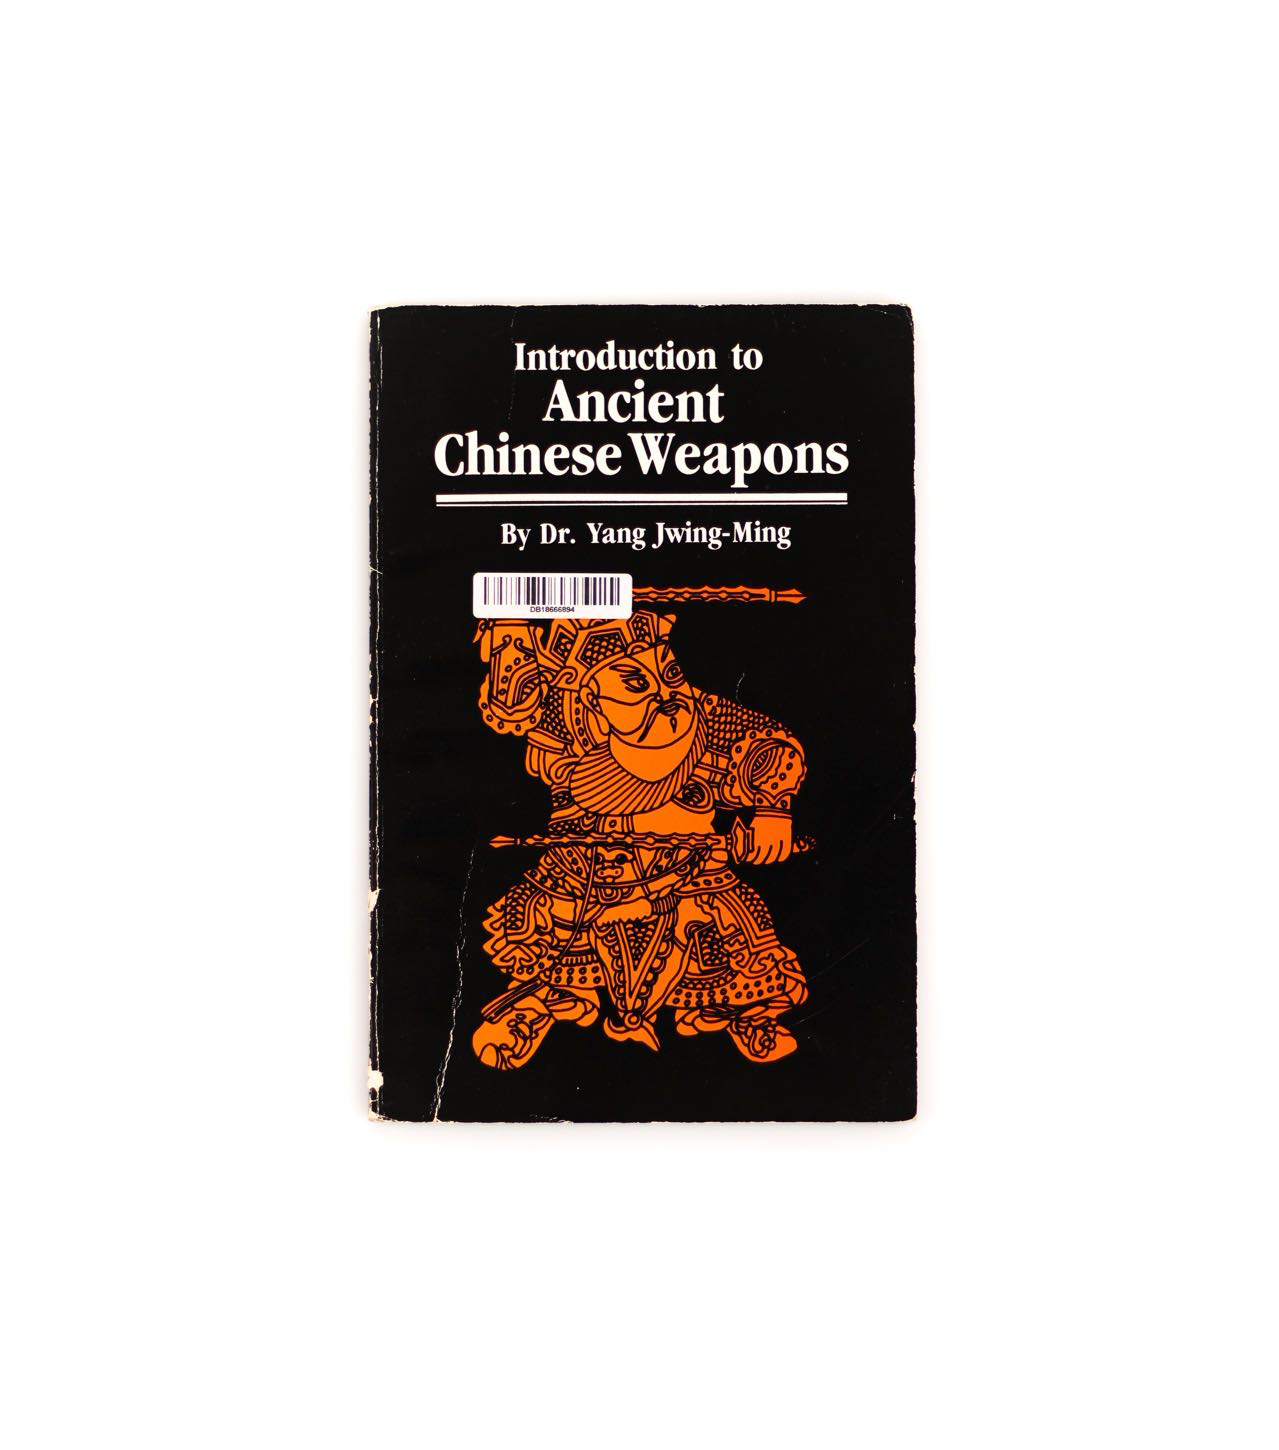 fengbao bibliothek introduction to ancient chinese weapons dr jwing ming yang c max wessely